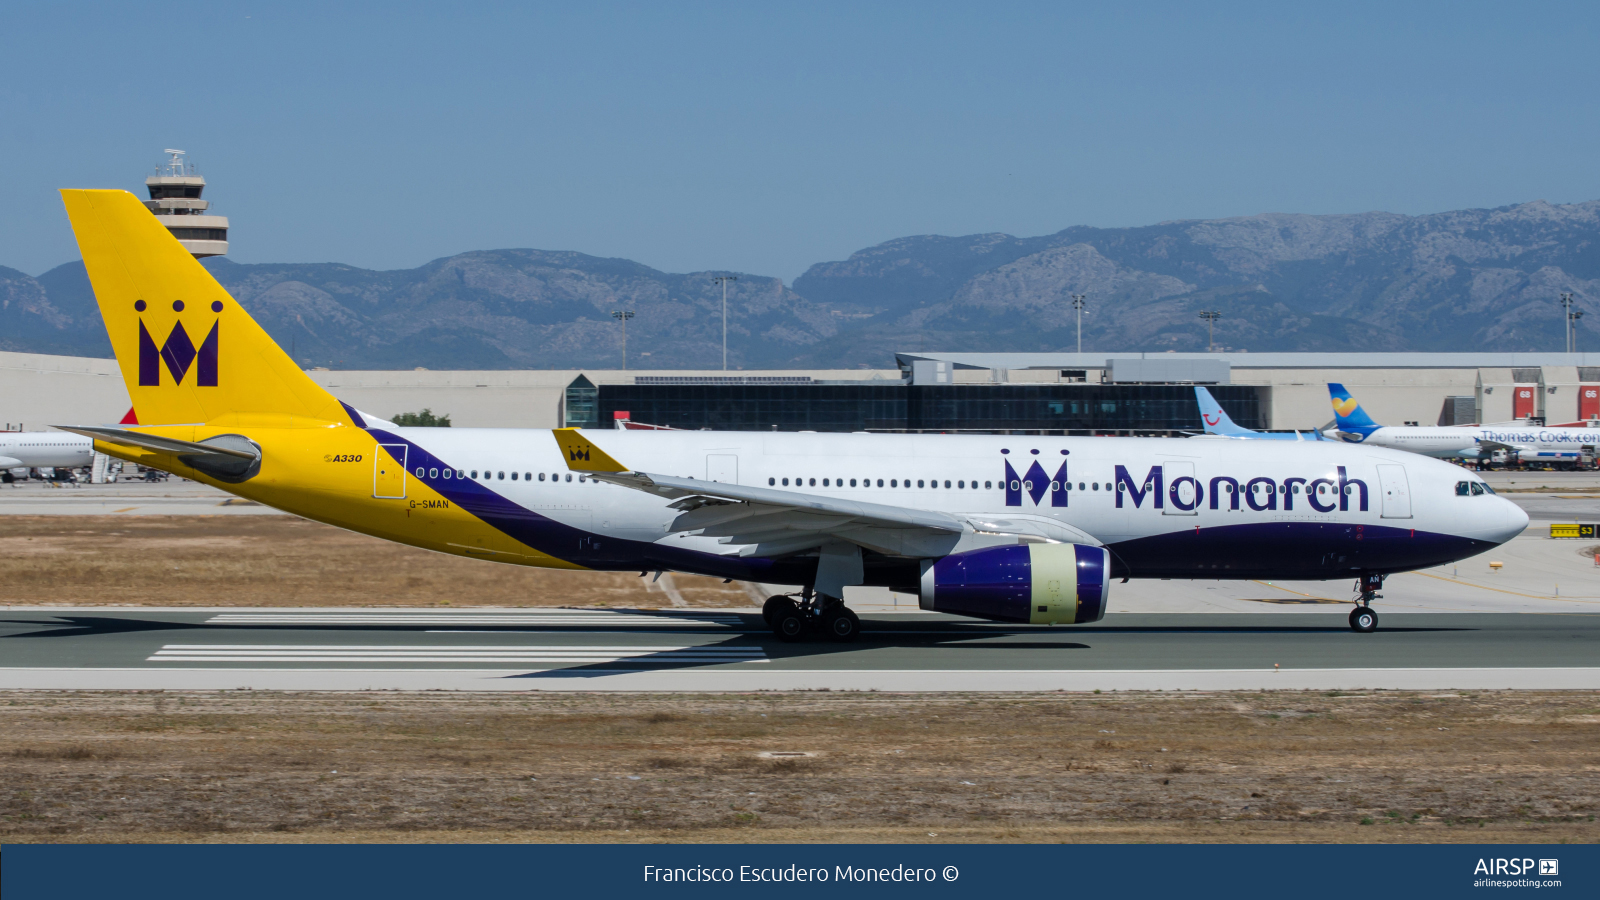 Monarch Airlines  Airbus A330-200  G-SMAN